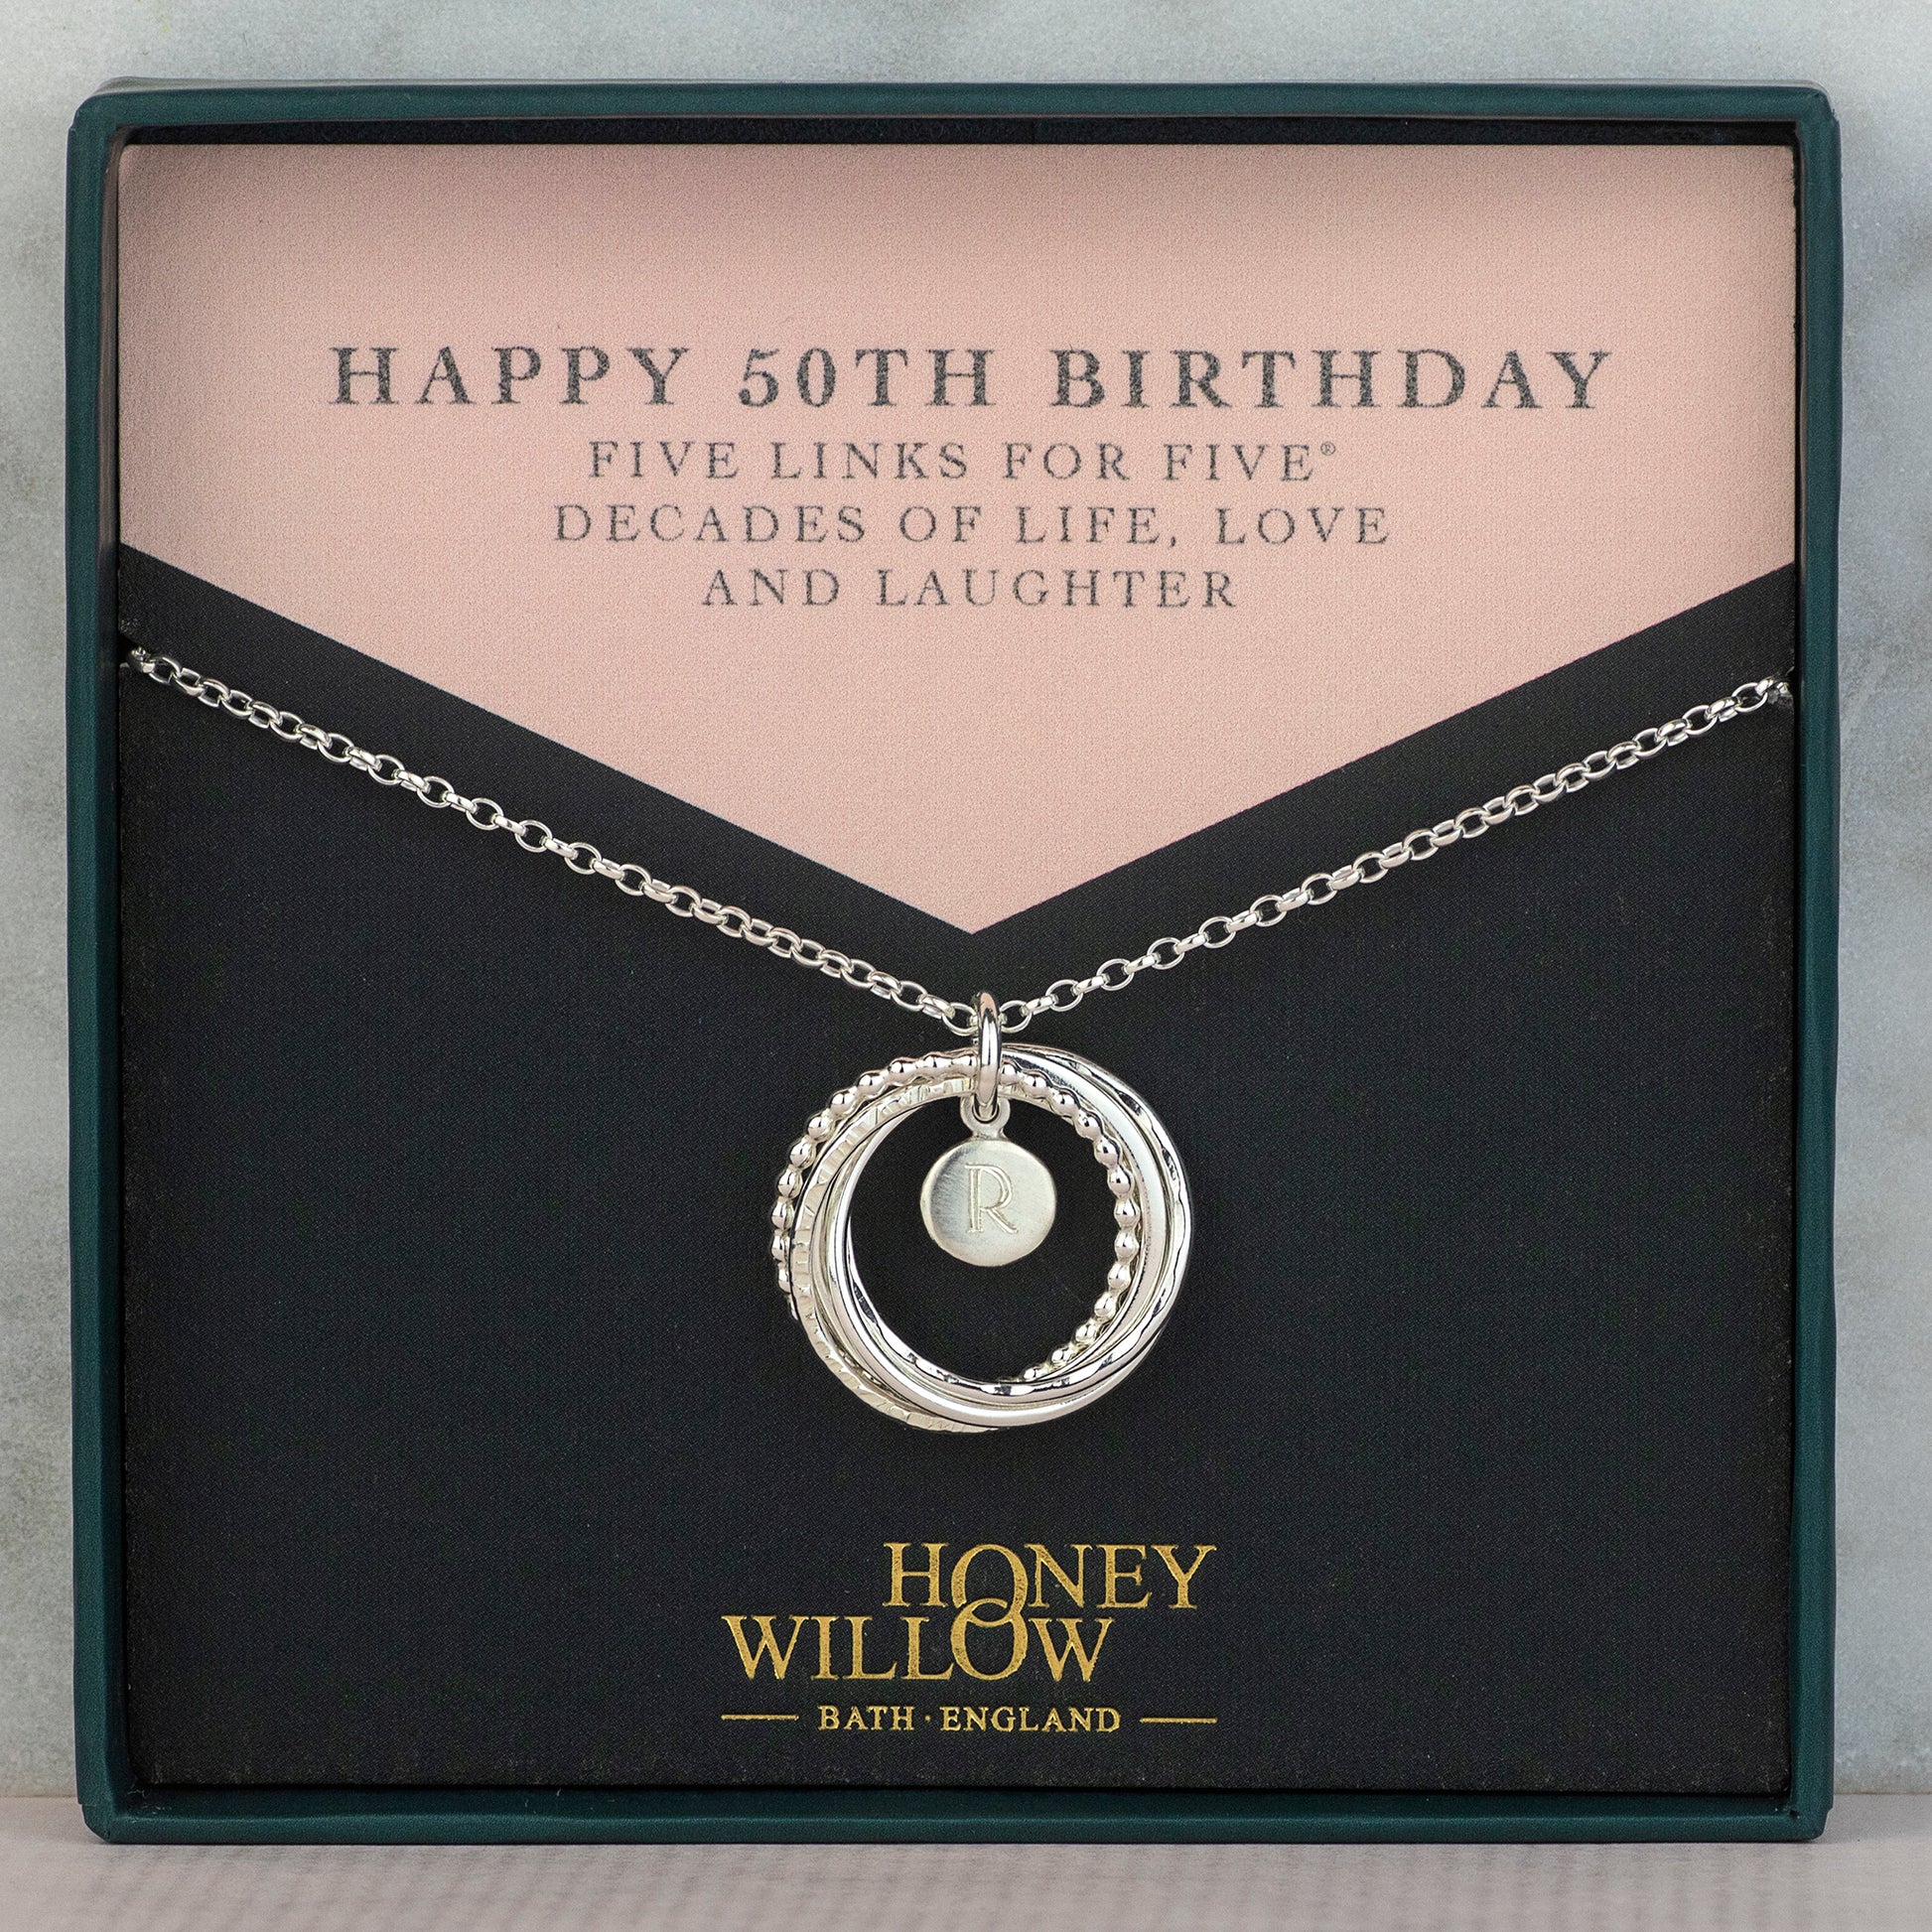 50th Birthday Initial Necklace - The Original 5 Links for 5 Decades Necklace - Silver